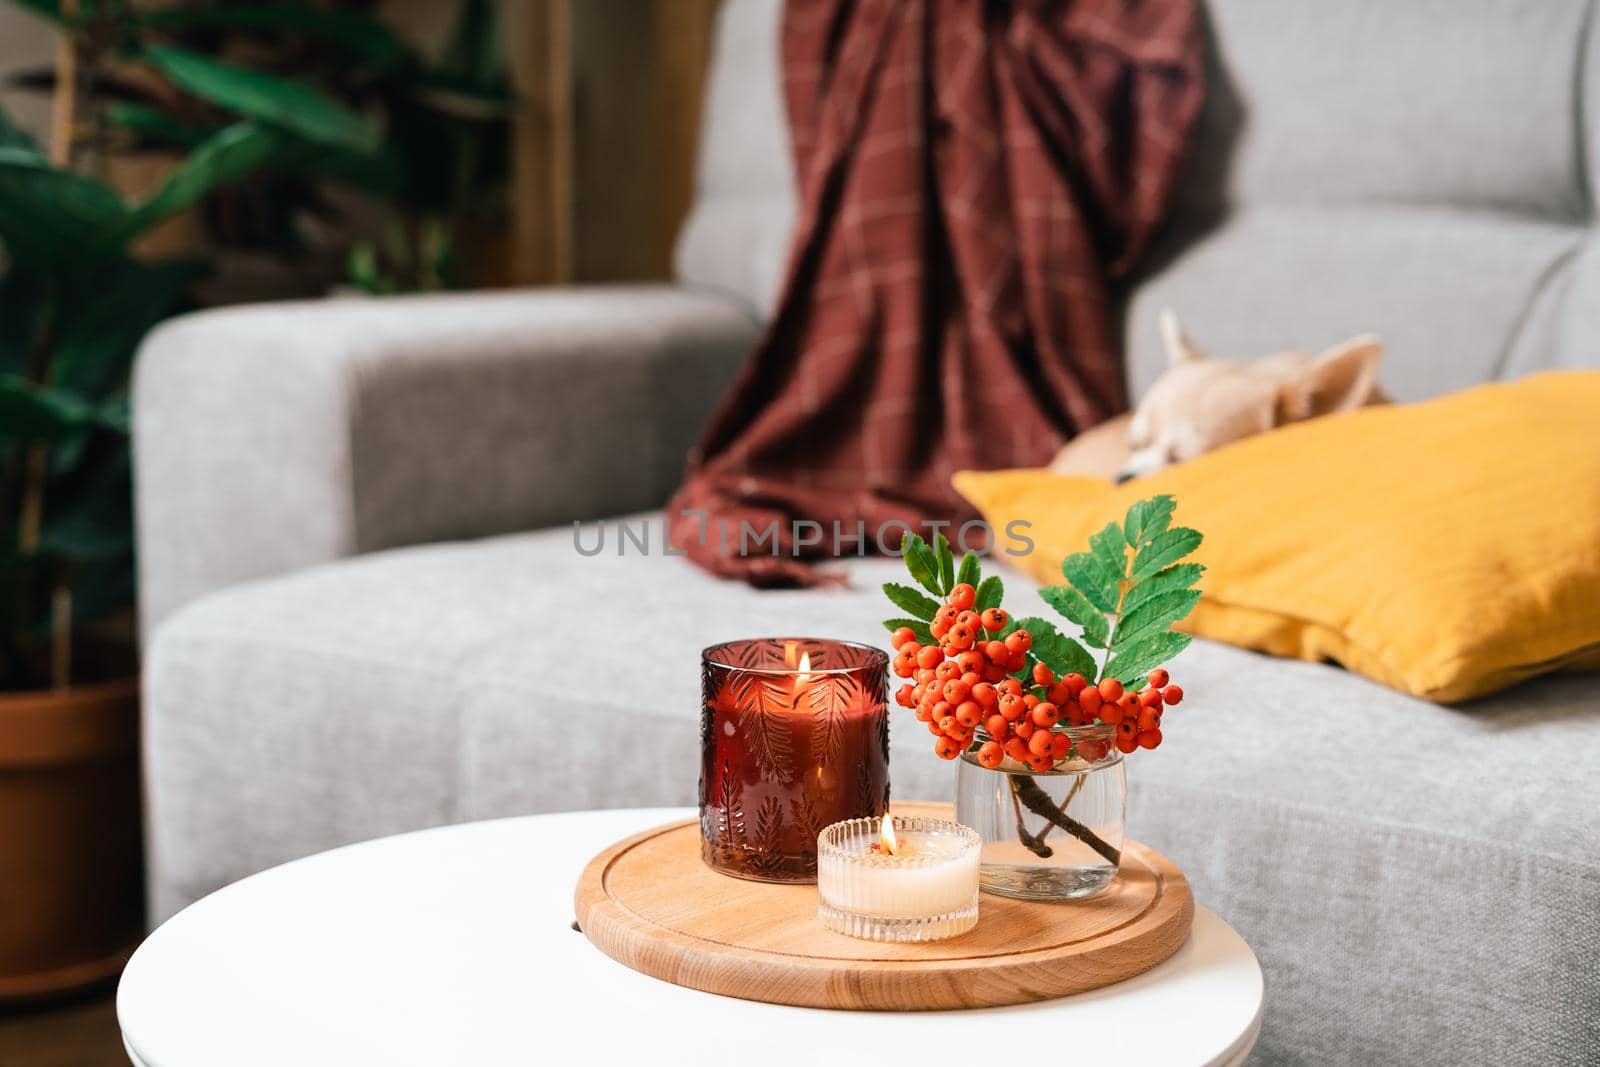 Still life, candle, rowan berry and pumpkin in the living room on a table, home decor in a cozy house. Autumn weekend concept, blanket and plaid. Fallen leaves and dog puppy on couch